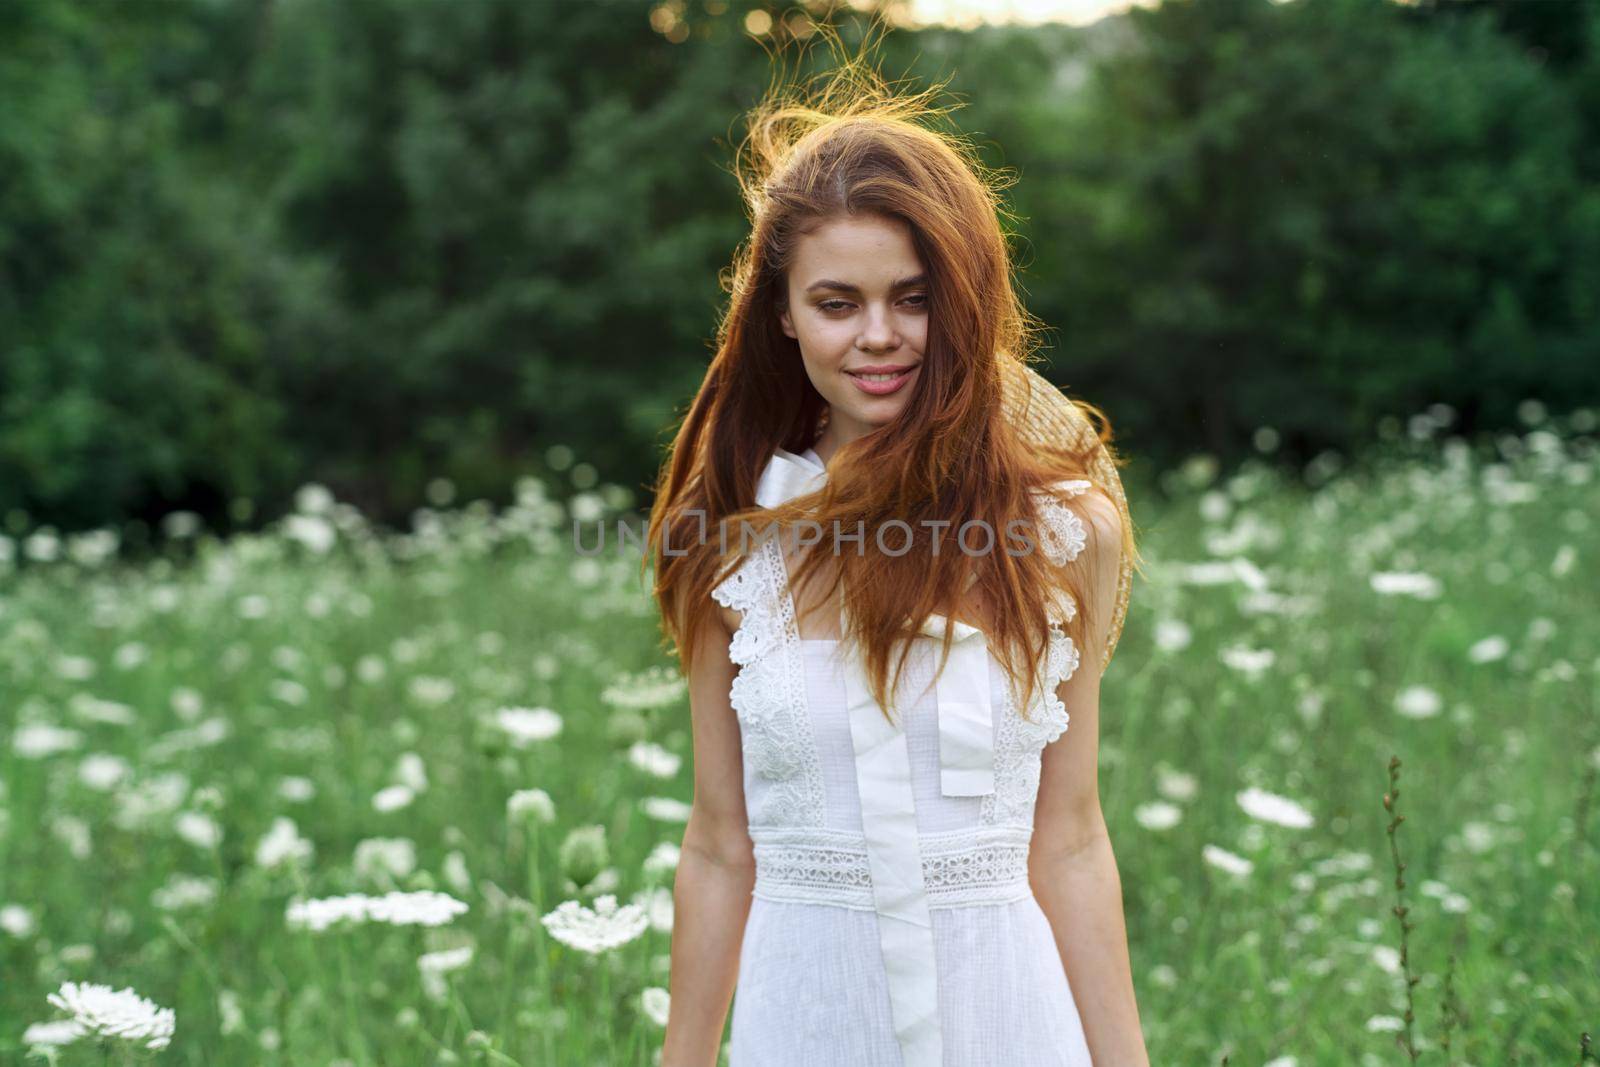 Woman in white dress in a field walk flowers vintage nature by Vichizh